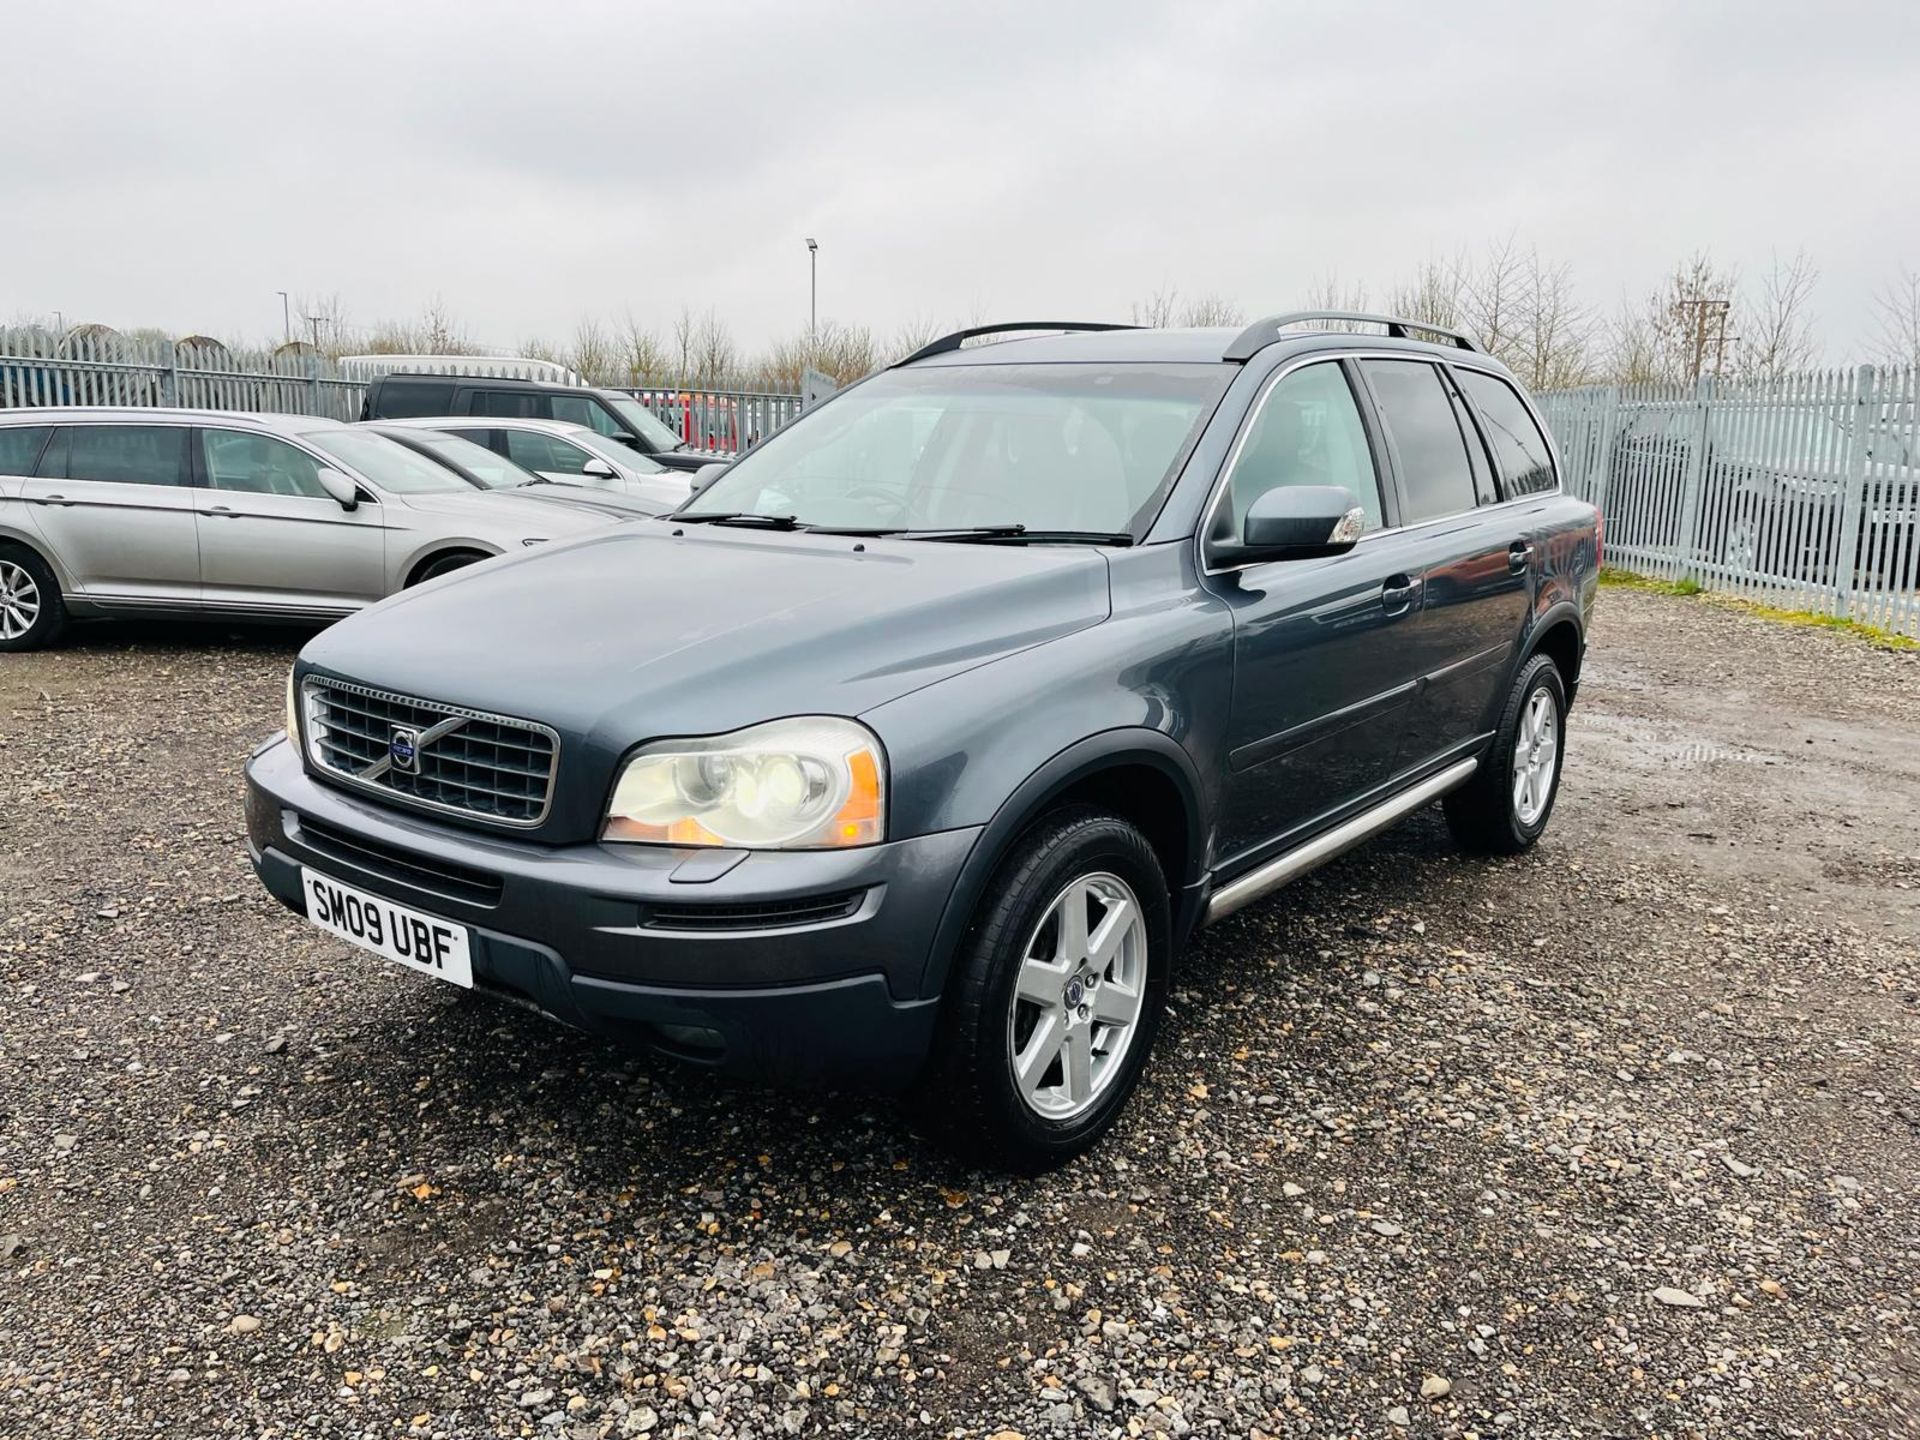 ** ON SALE ** Volvo Xc90 Active Automatic D5 185 Geartronic -Air Conditioning -Bluetooth Handsfree - Image 3 of 36